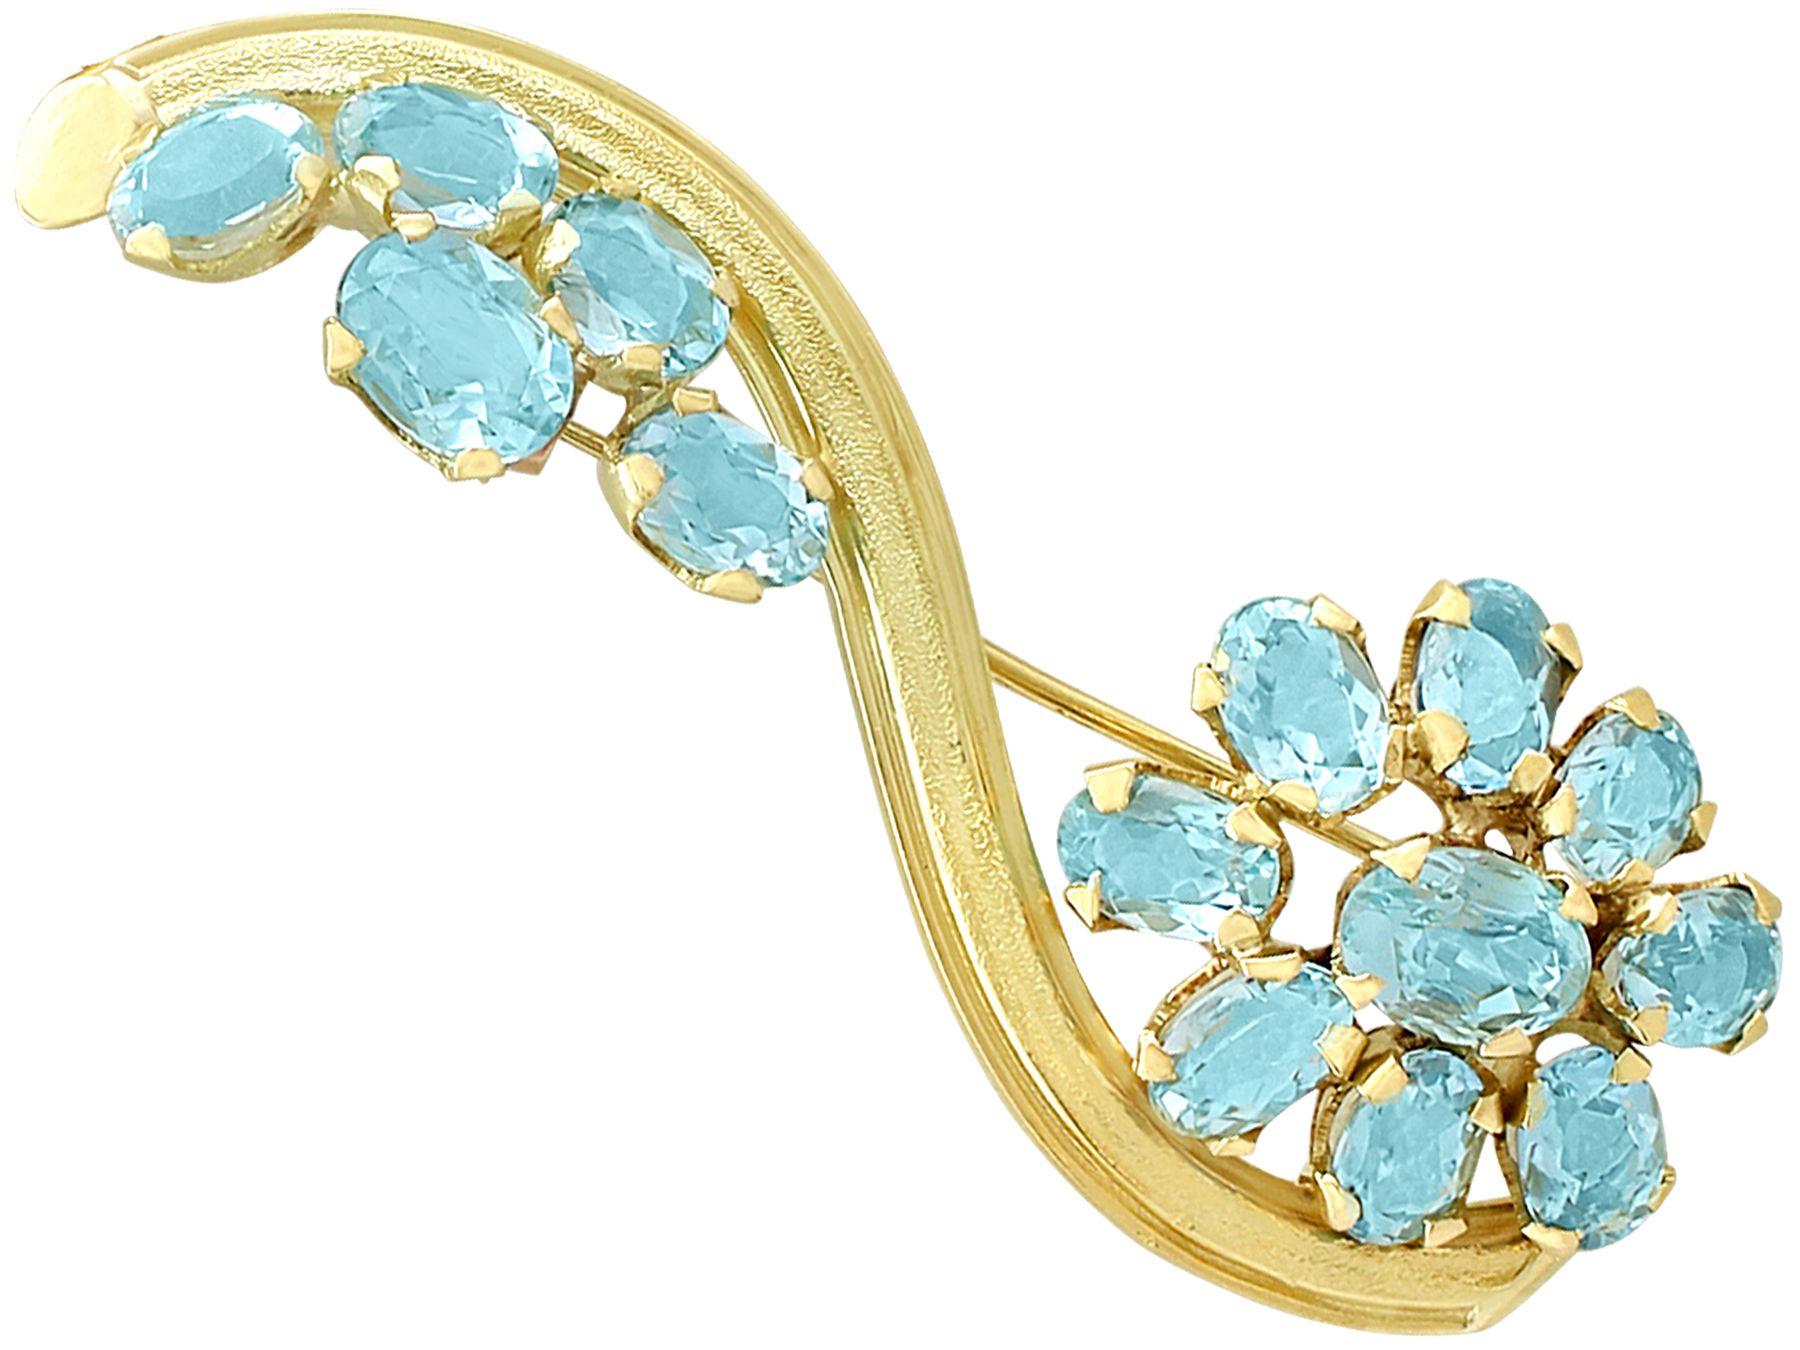 Vintage 1950s 6.05 Carat Aquamarine and Yellow Gold Pendant / Brooch In Excellent Condition For Sale In Jesmond, Newcastle Upon Tyne